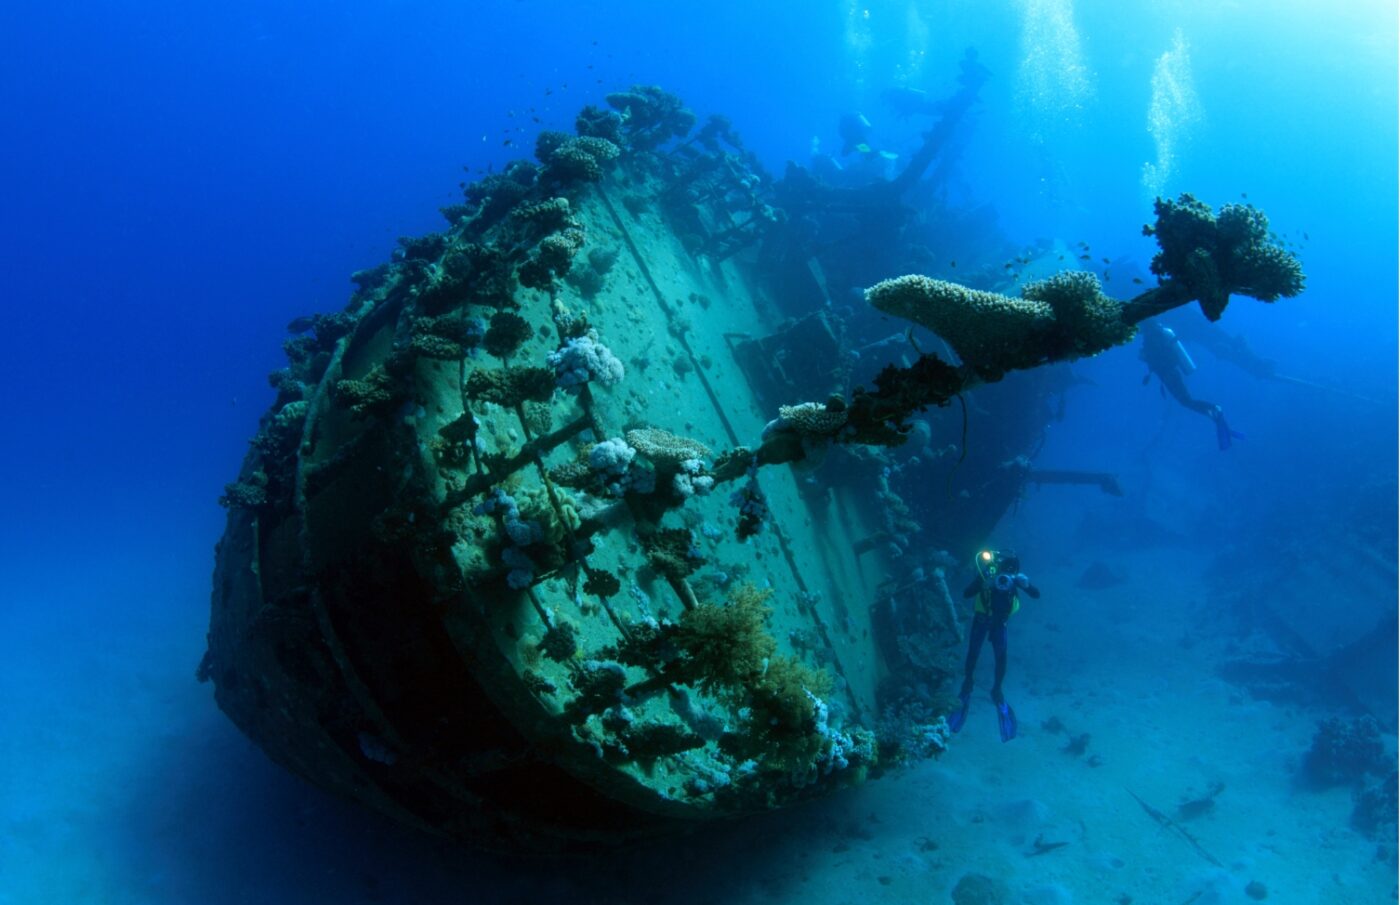 red sea shipwreck, best scuba diving in the world